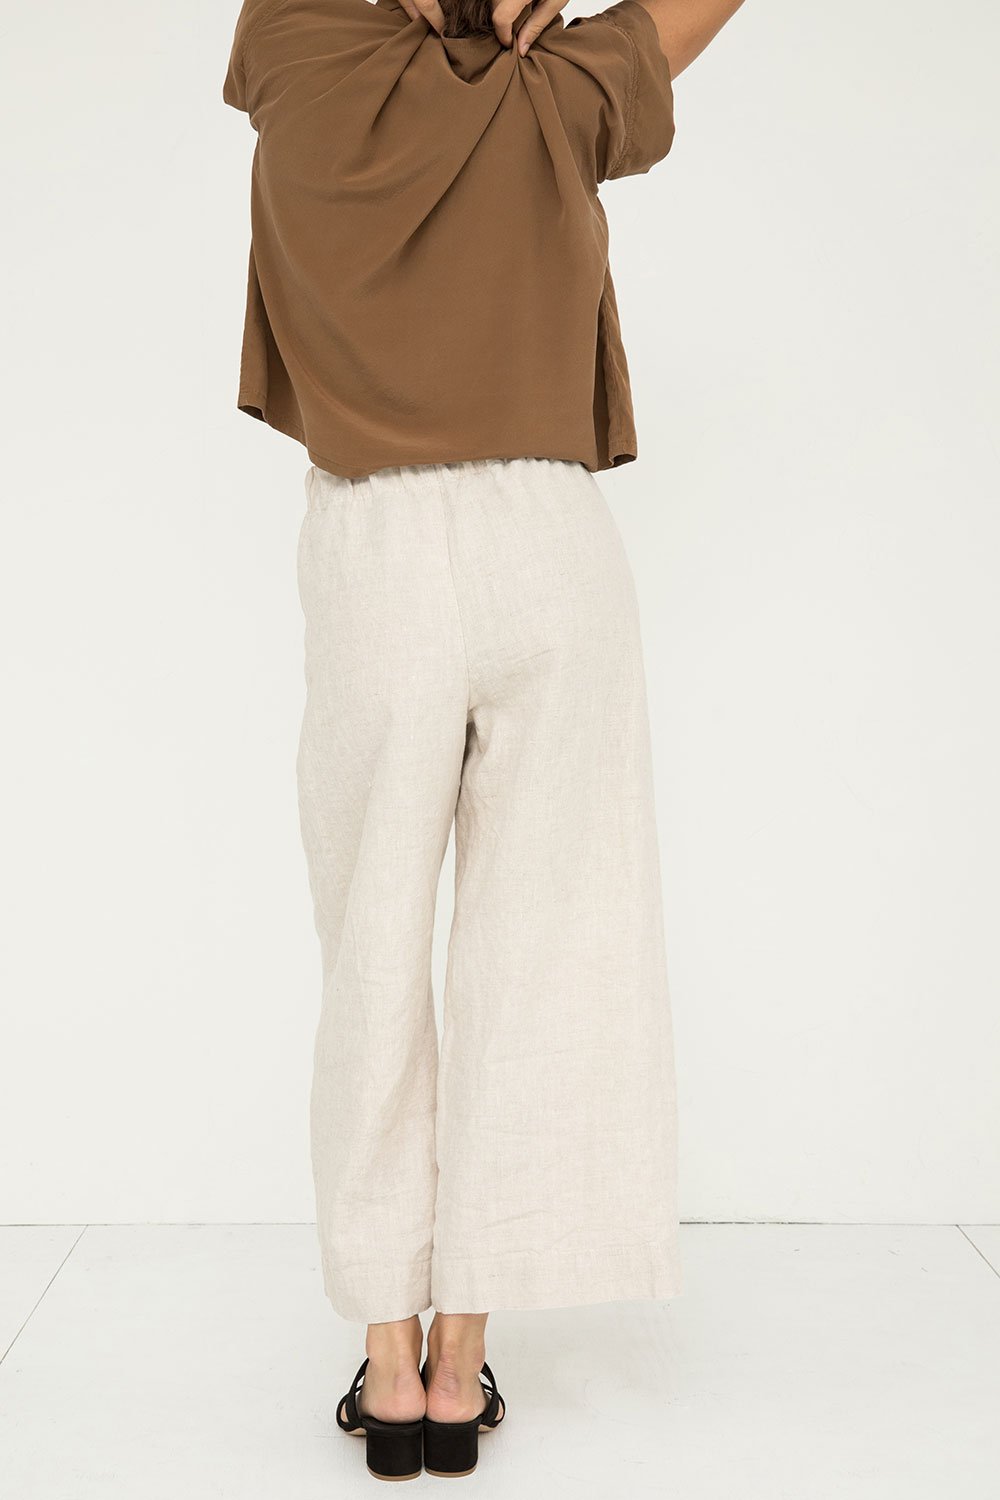 *FINAL SALE* Florence Pant in Midweight Linen – Elizabeth Suzann